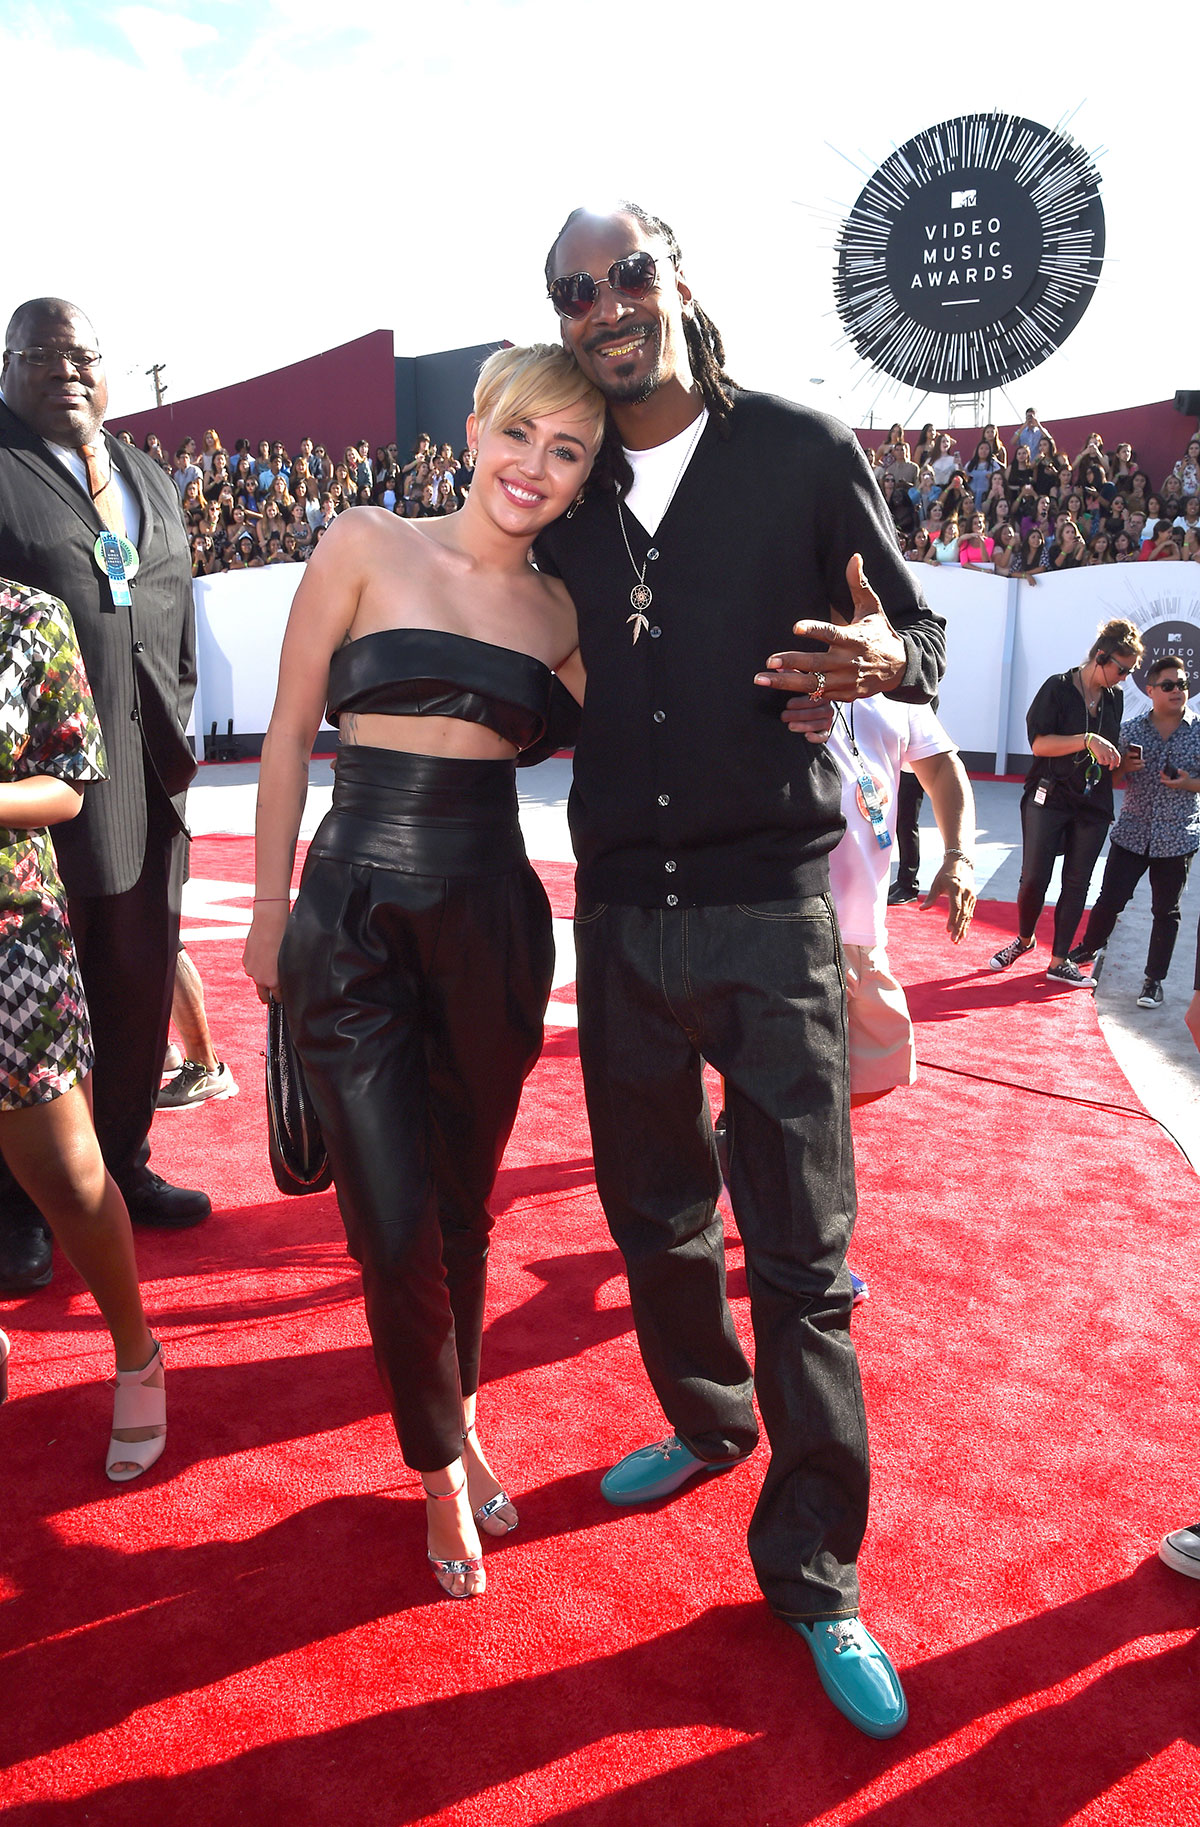 Miley Cyrus attends 2014 MTV Video Music Awards